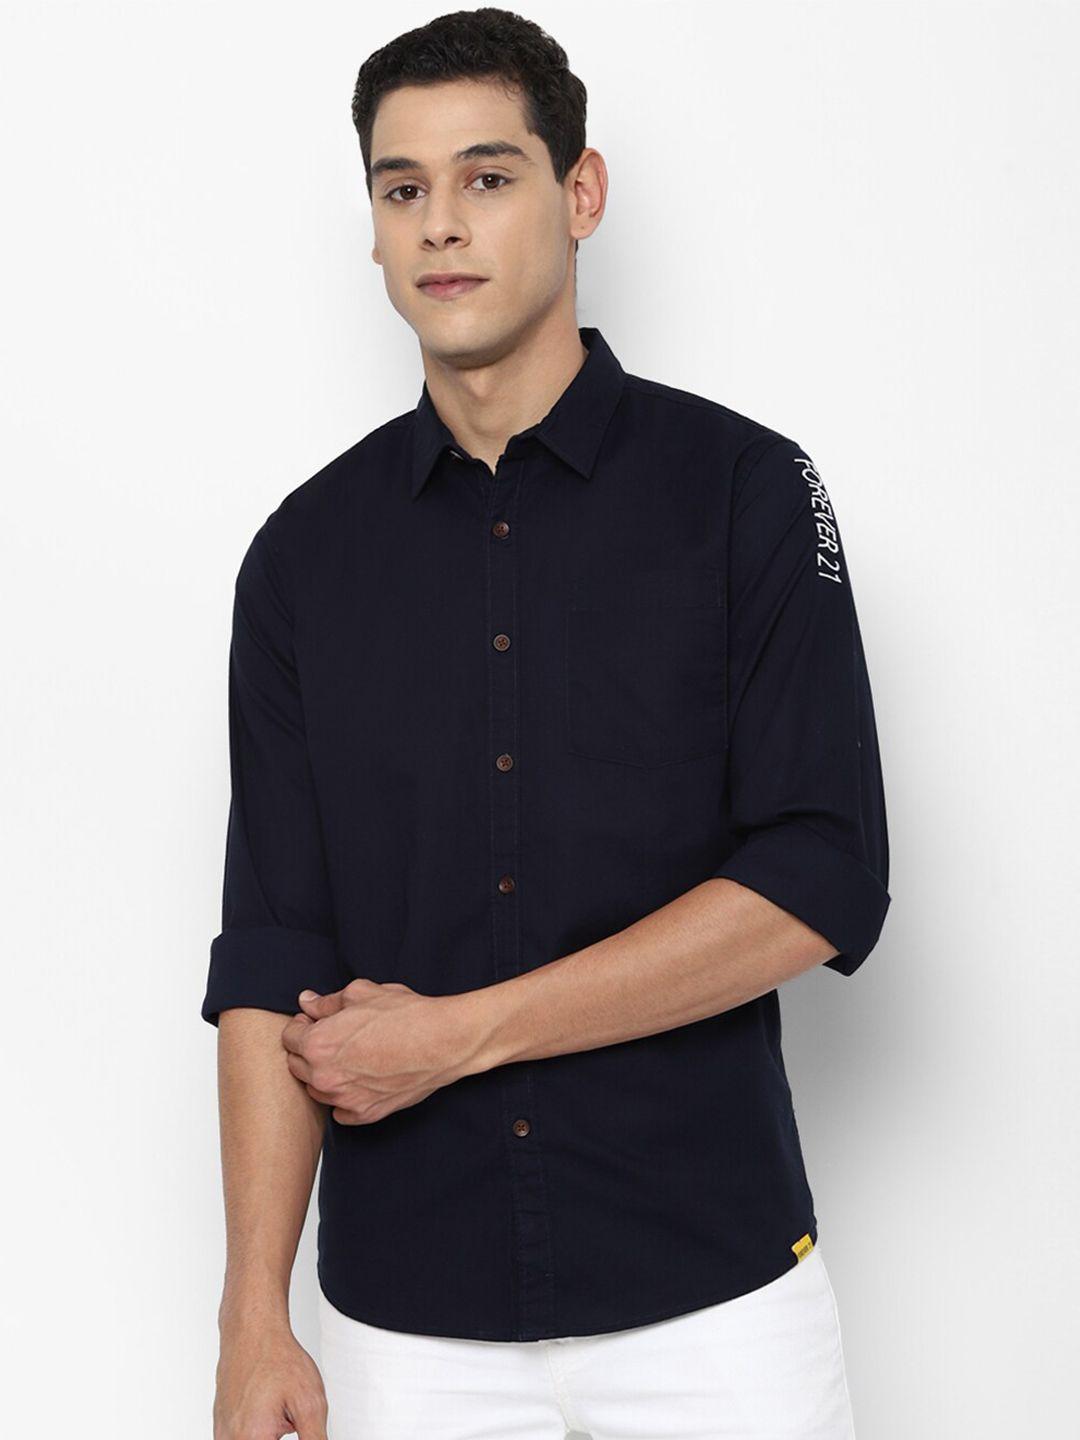 forever-21-men-navy-blue-slim-fit-opaque-pure-cotton-casual-shirt